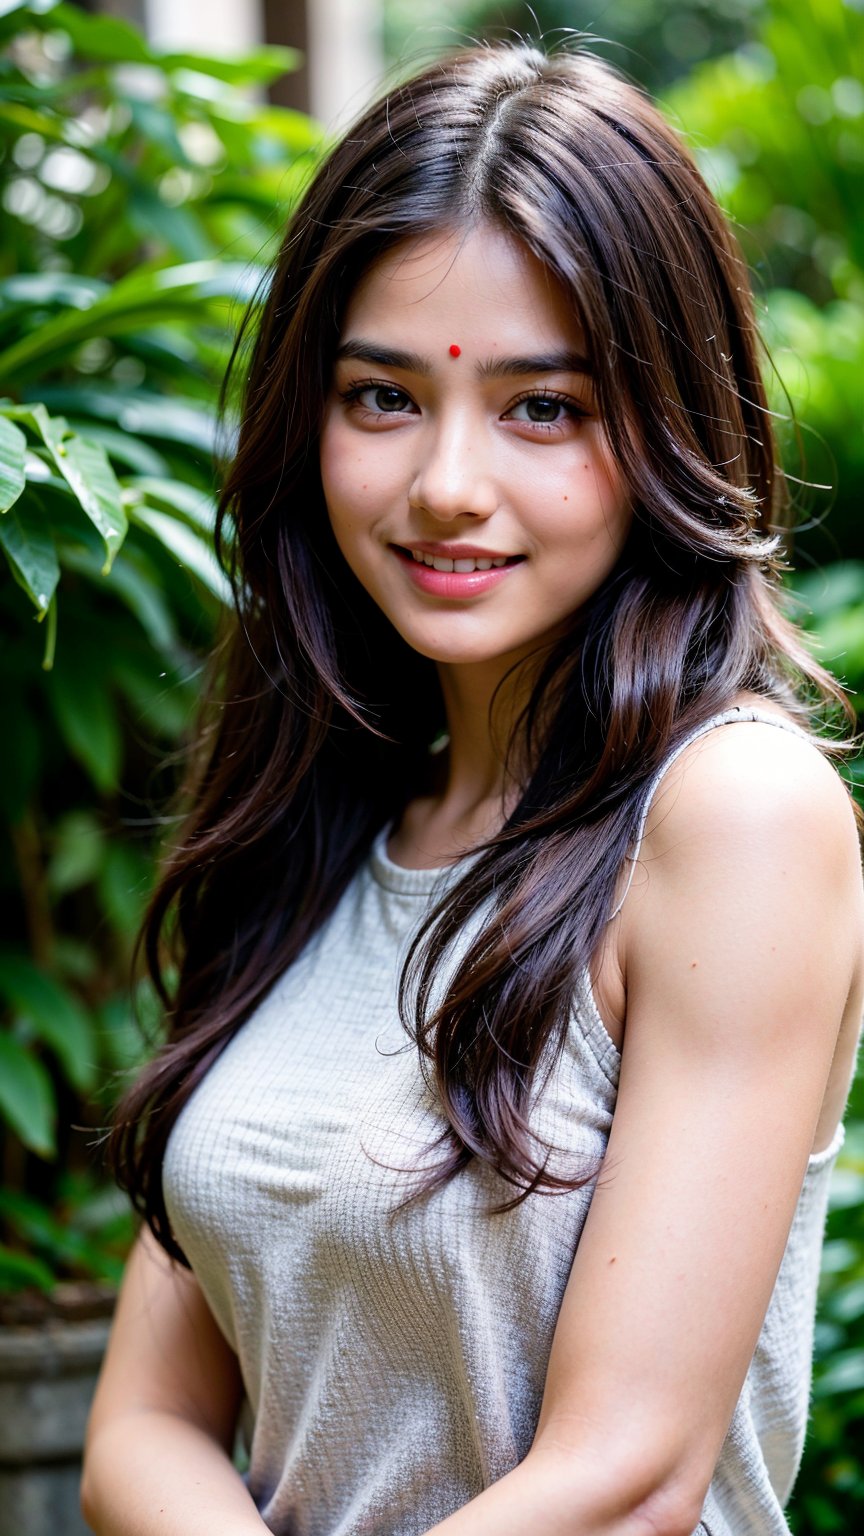 beautiful cute young attractive indian teenage girl, village girl, 22 years old, cute,  Instagram model, long brownish hair, warm, indian, large brown eyes
Smiling, walking like a dog
Ultra-detailed and realistic 
,kristinapimenova